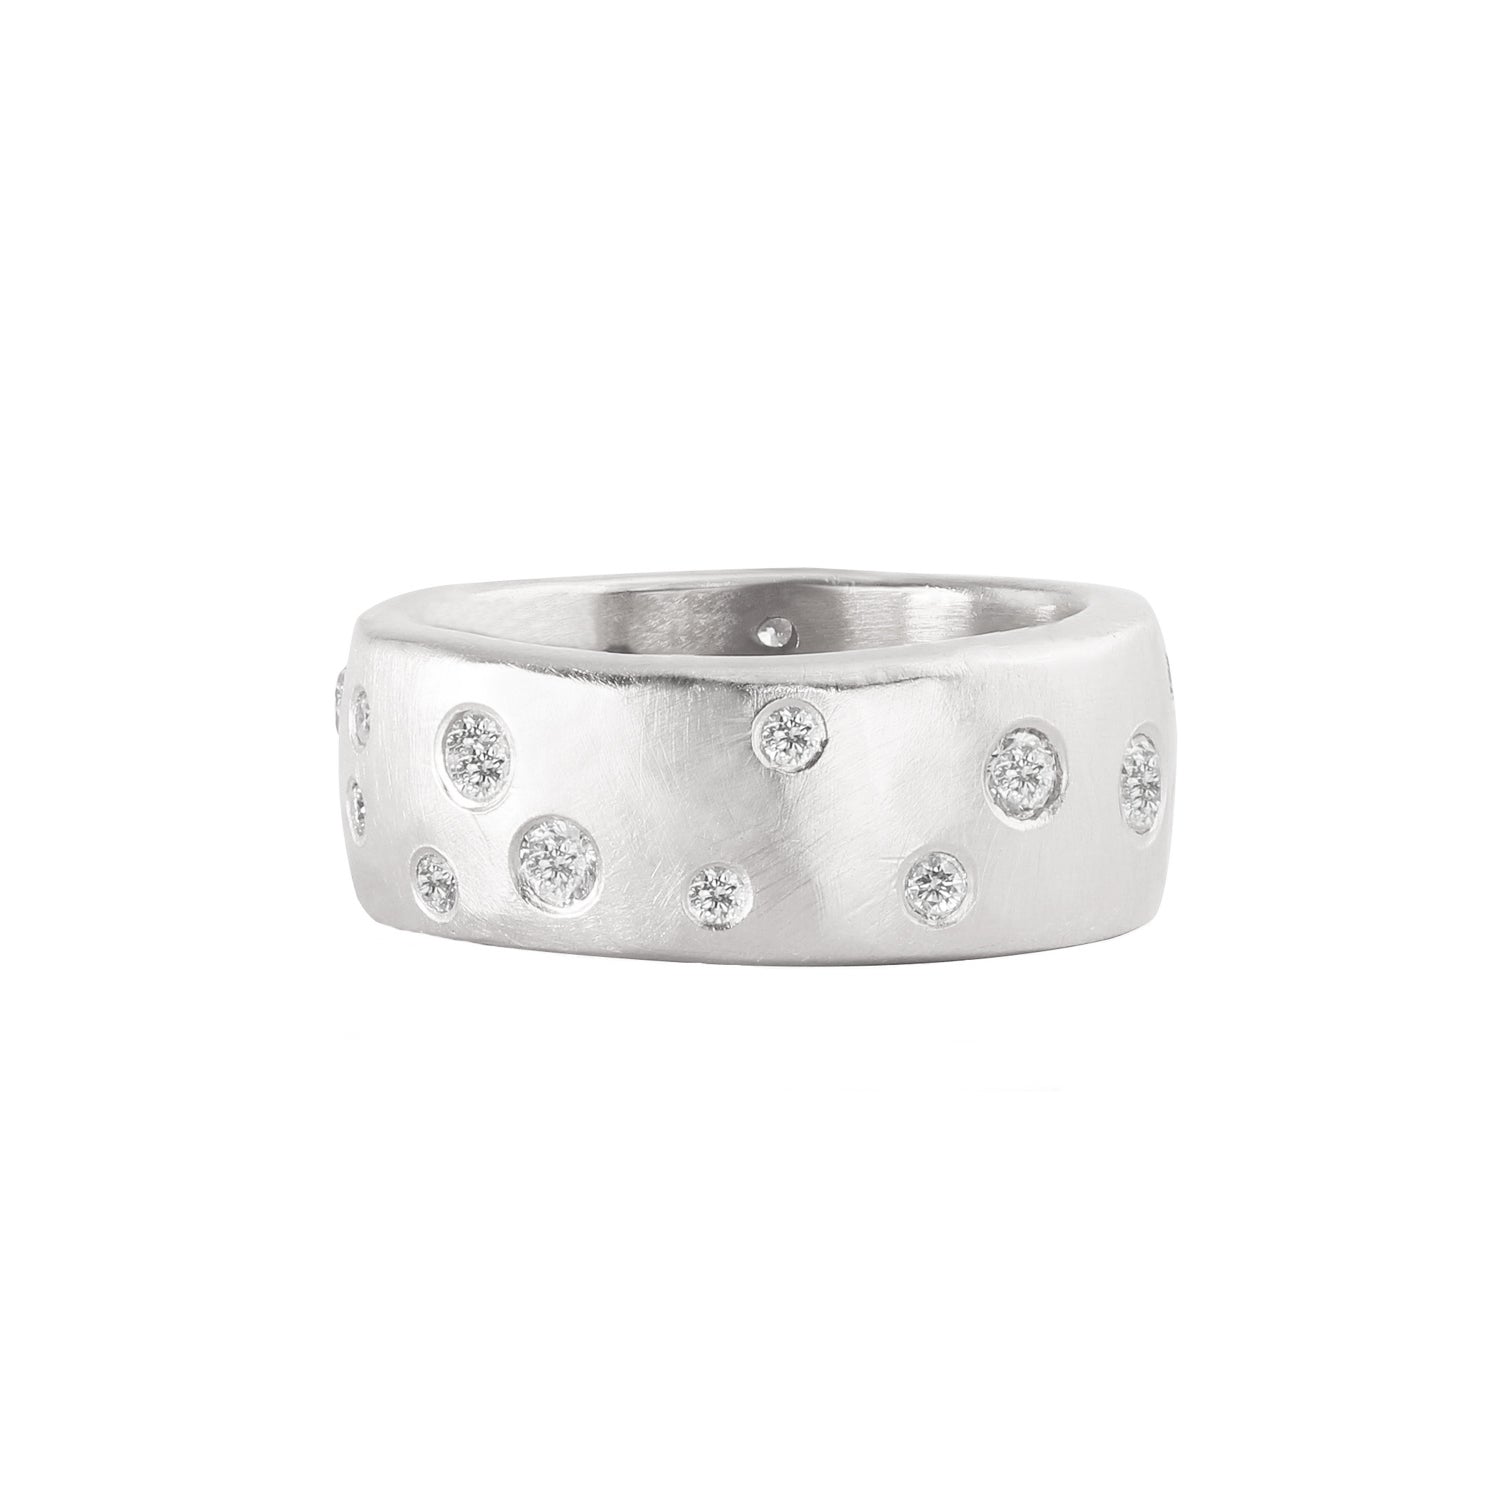 14k white gold wide band ring with scattered diamonds